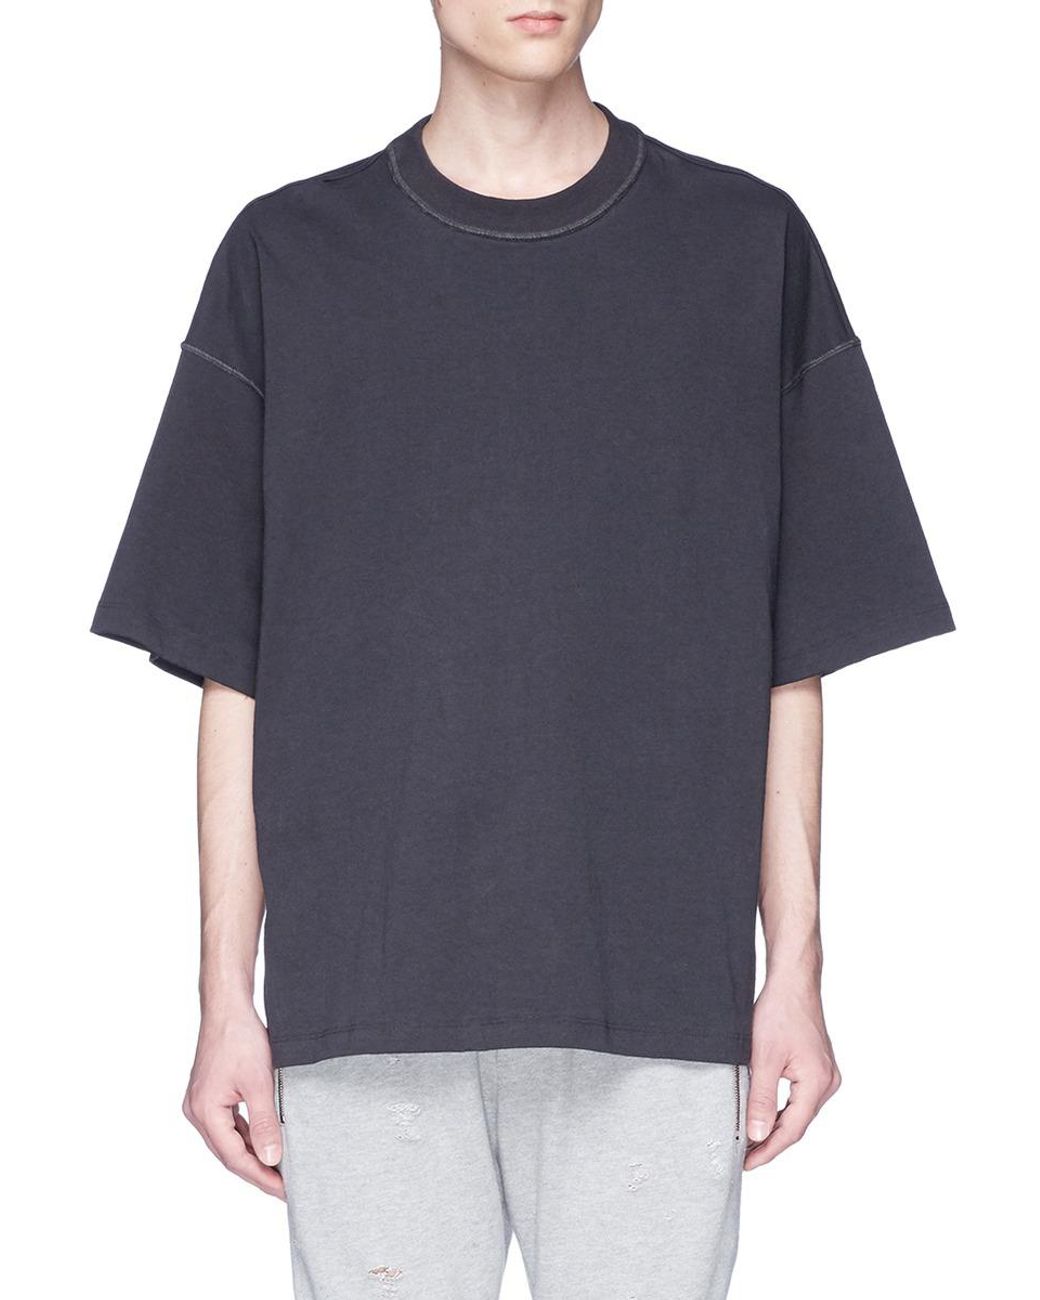 FEAR OF GOD INSIDE OUT TEE